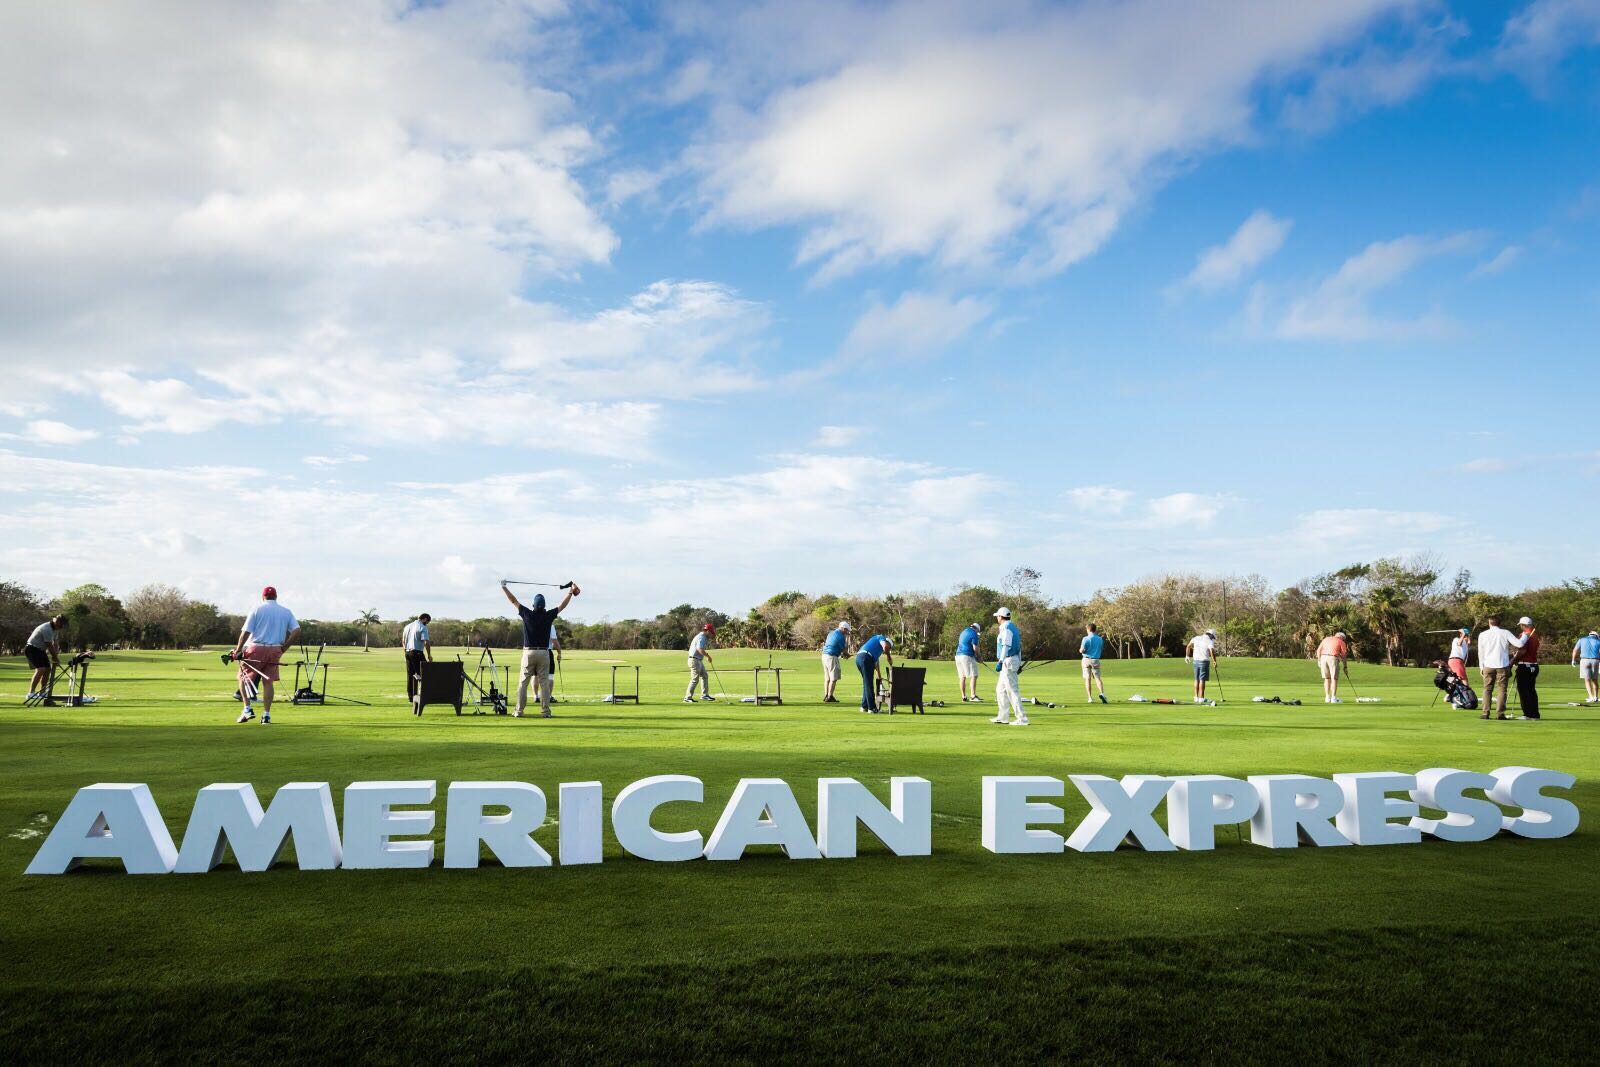 #PreviaNED: The American Express